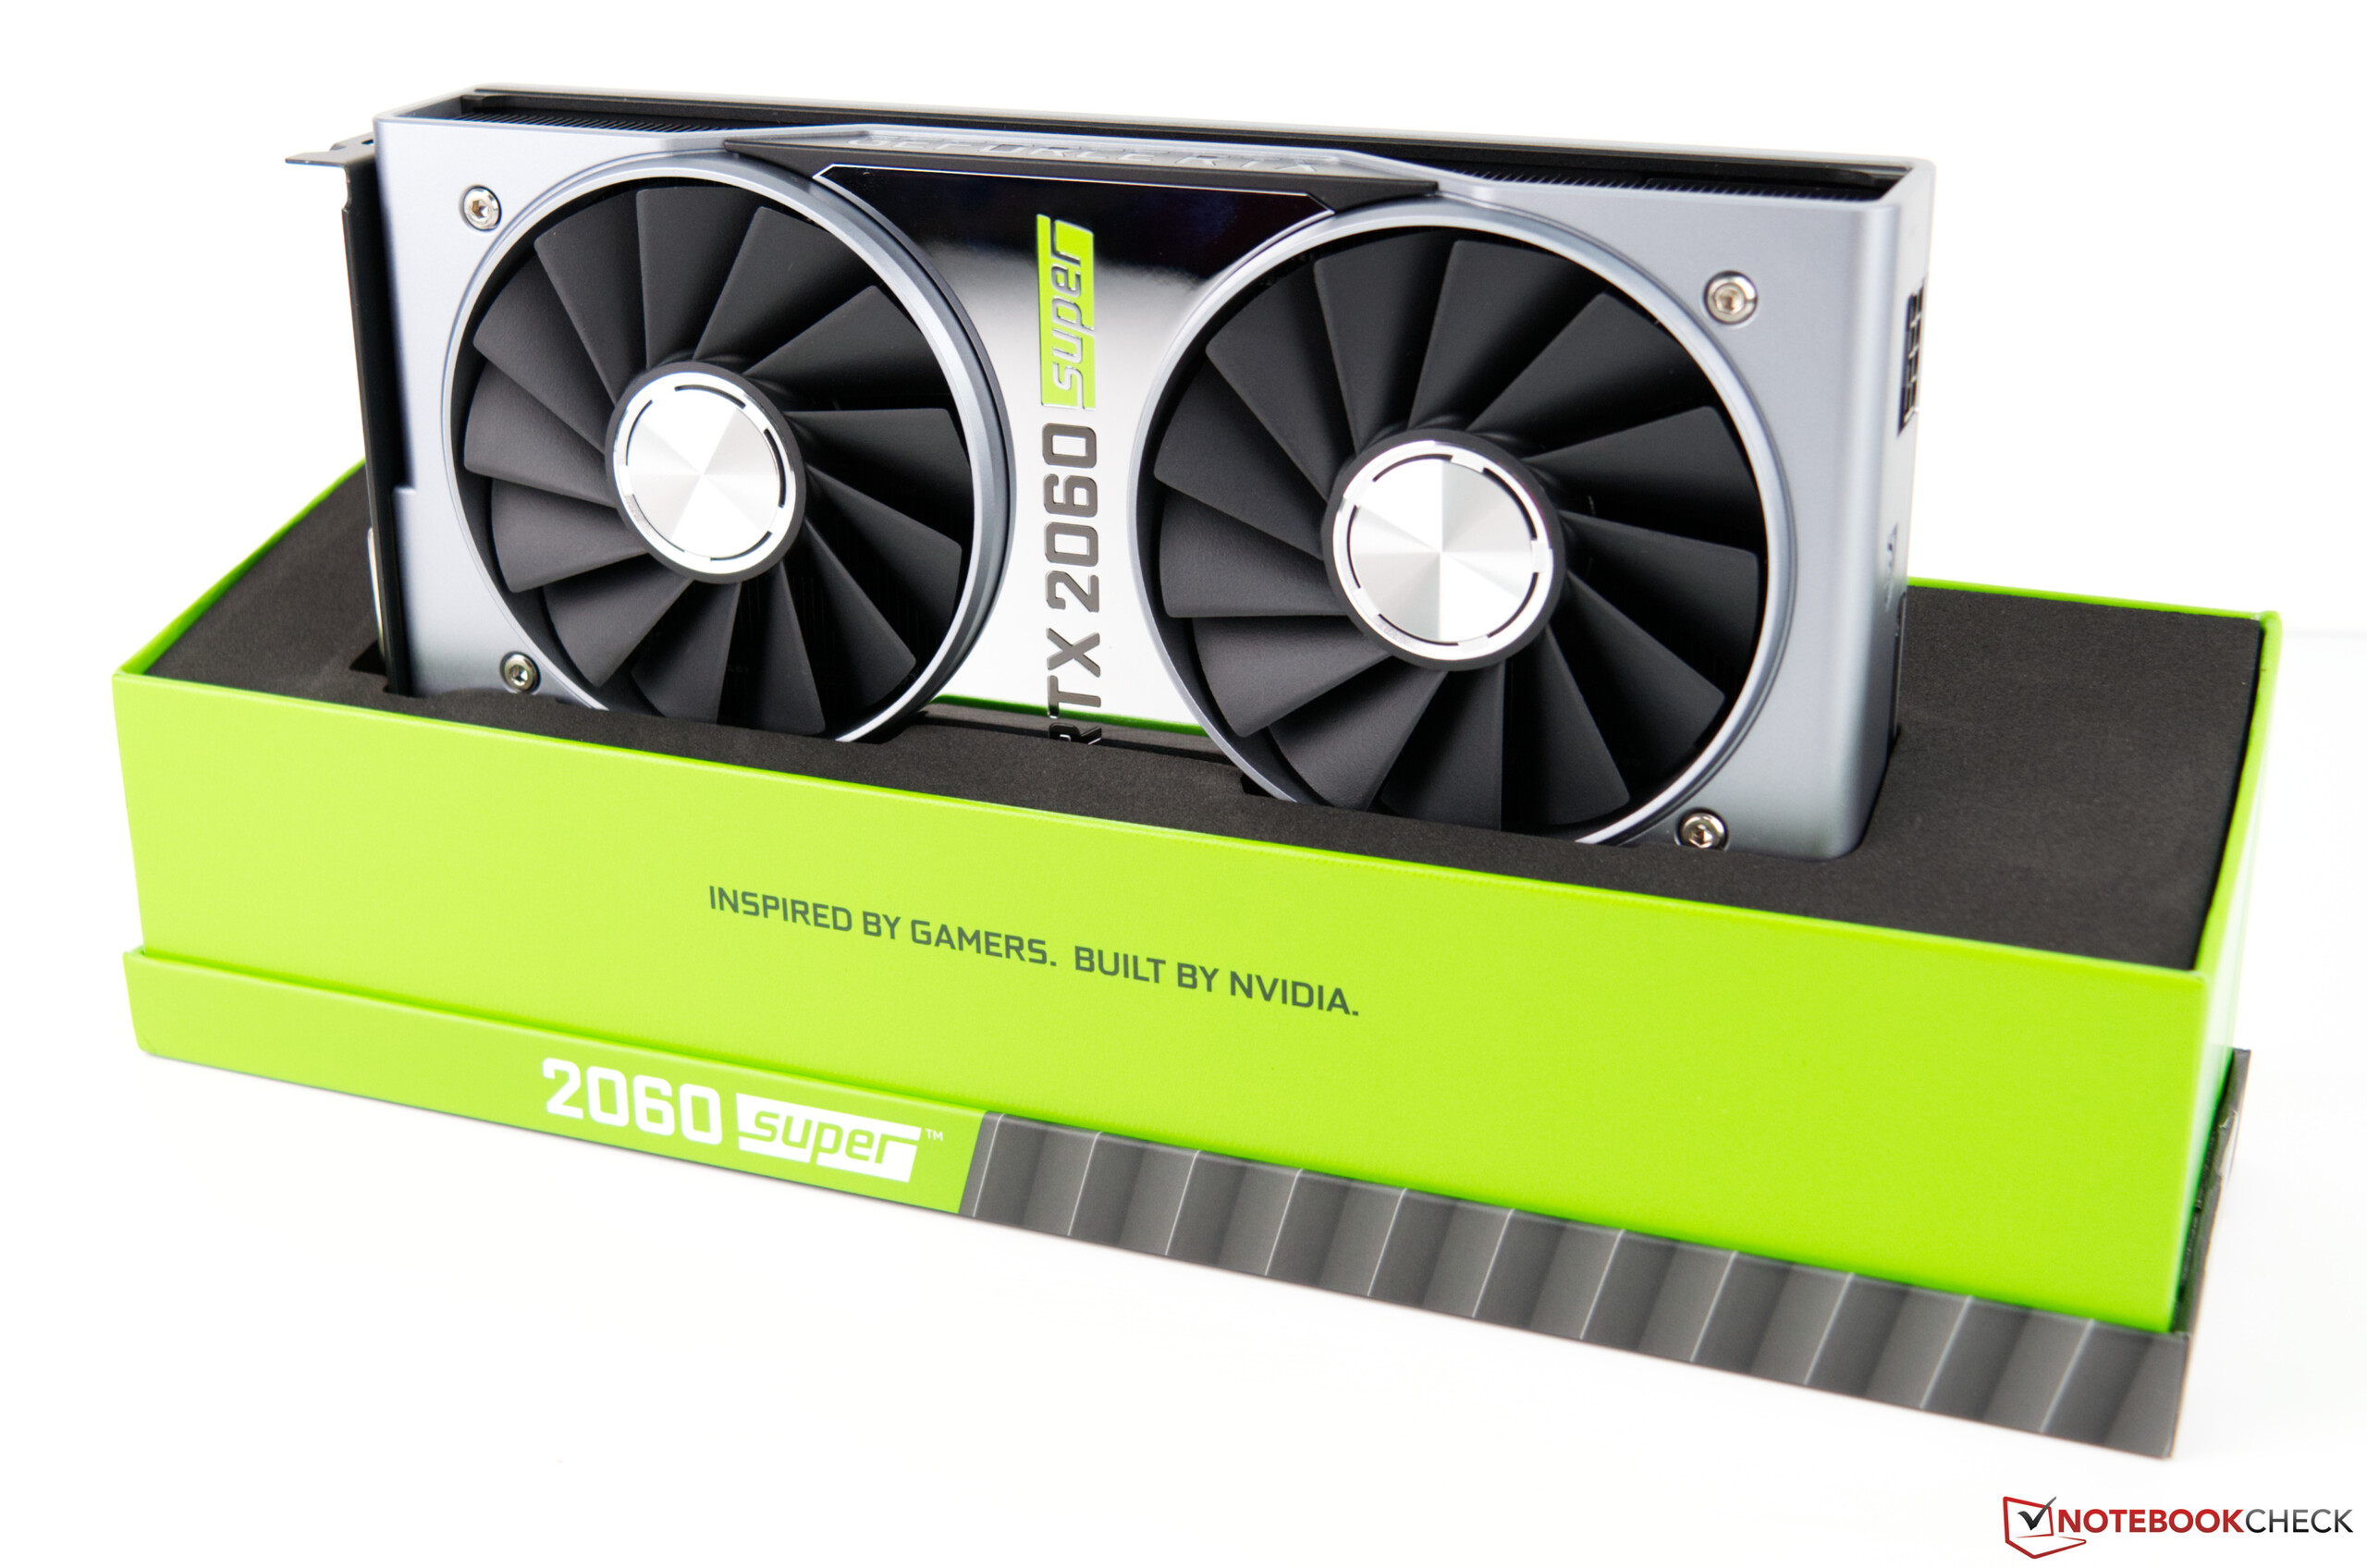 Barcelona dagsorden tæerne Nvidia GeForce RTX 2060 Super Review: The entry-level GPU finally comes  with 8 GB of VRAM - NotebookCheck.net Reviews